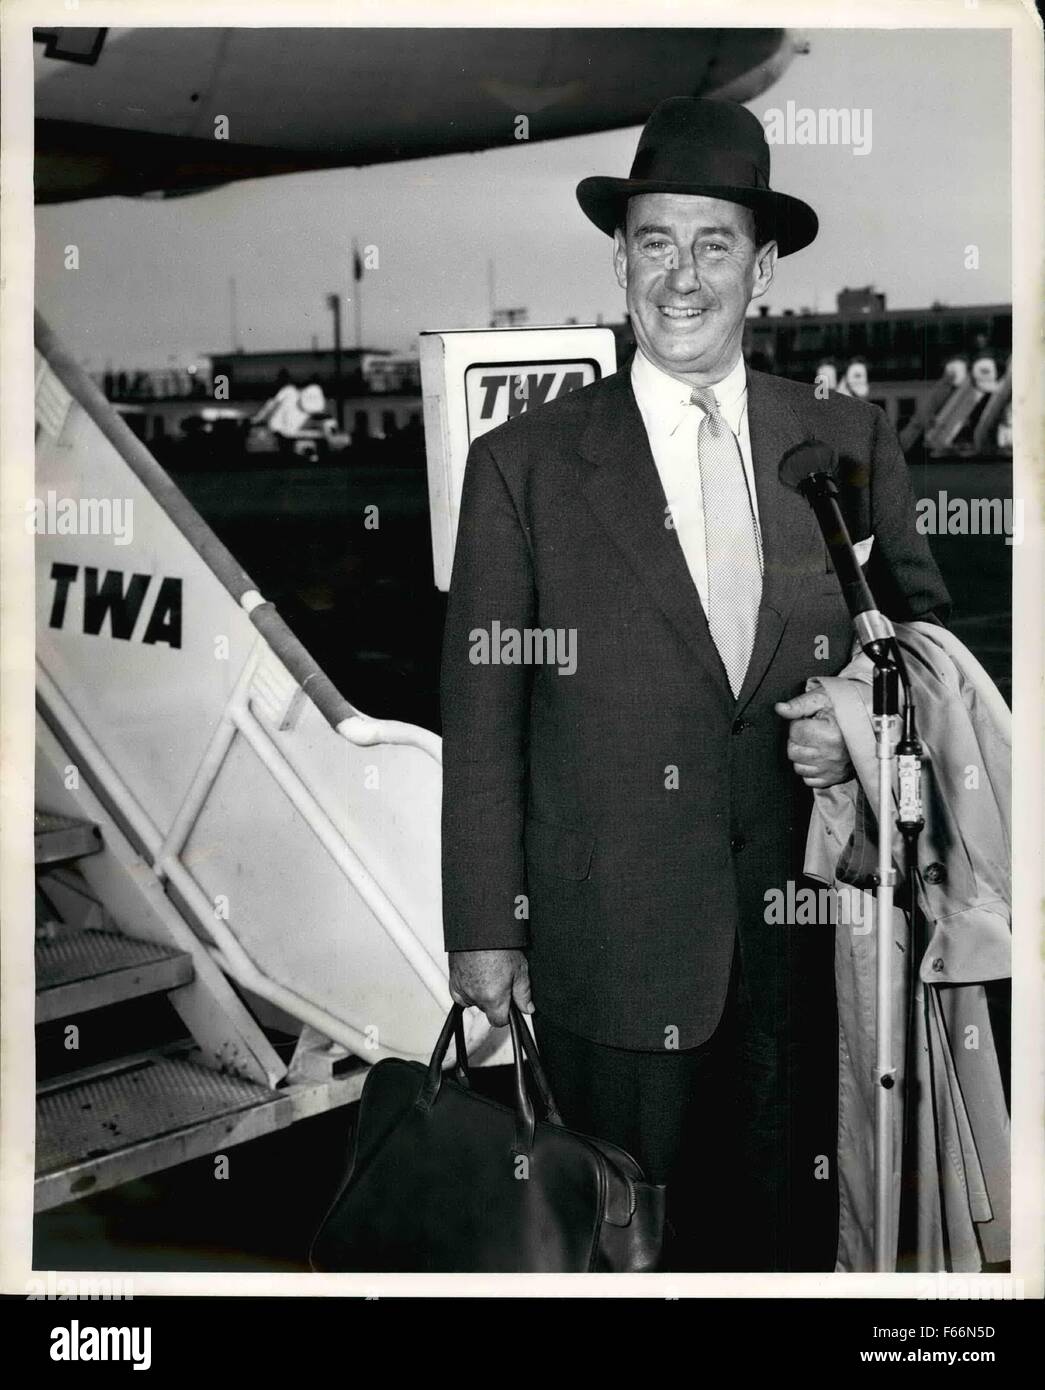 1952 - American statesman Adlai E. Stevenson. 1952 Democratic presidential candidate, leaves for Rome on trans world airlines enroute to Africa, The purpose of the trip is to perform business transactions for American law clients, but Mr. Stevenson will do sightseeing in Nairobi, Uganda, Belgian Congo and south Africa, much of which is new territory to him. Accompanying him on the journey is William McCormick Blair, Jr. A business associate. © Keystone Pictures USA/ZUMAPRESS.com/Alamy Live News Stock Photo